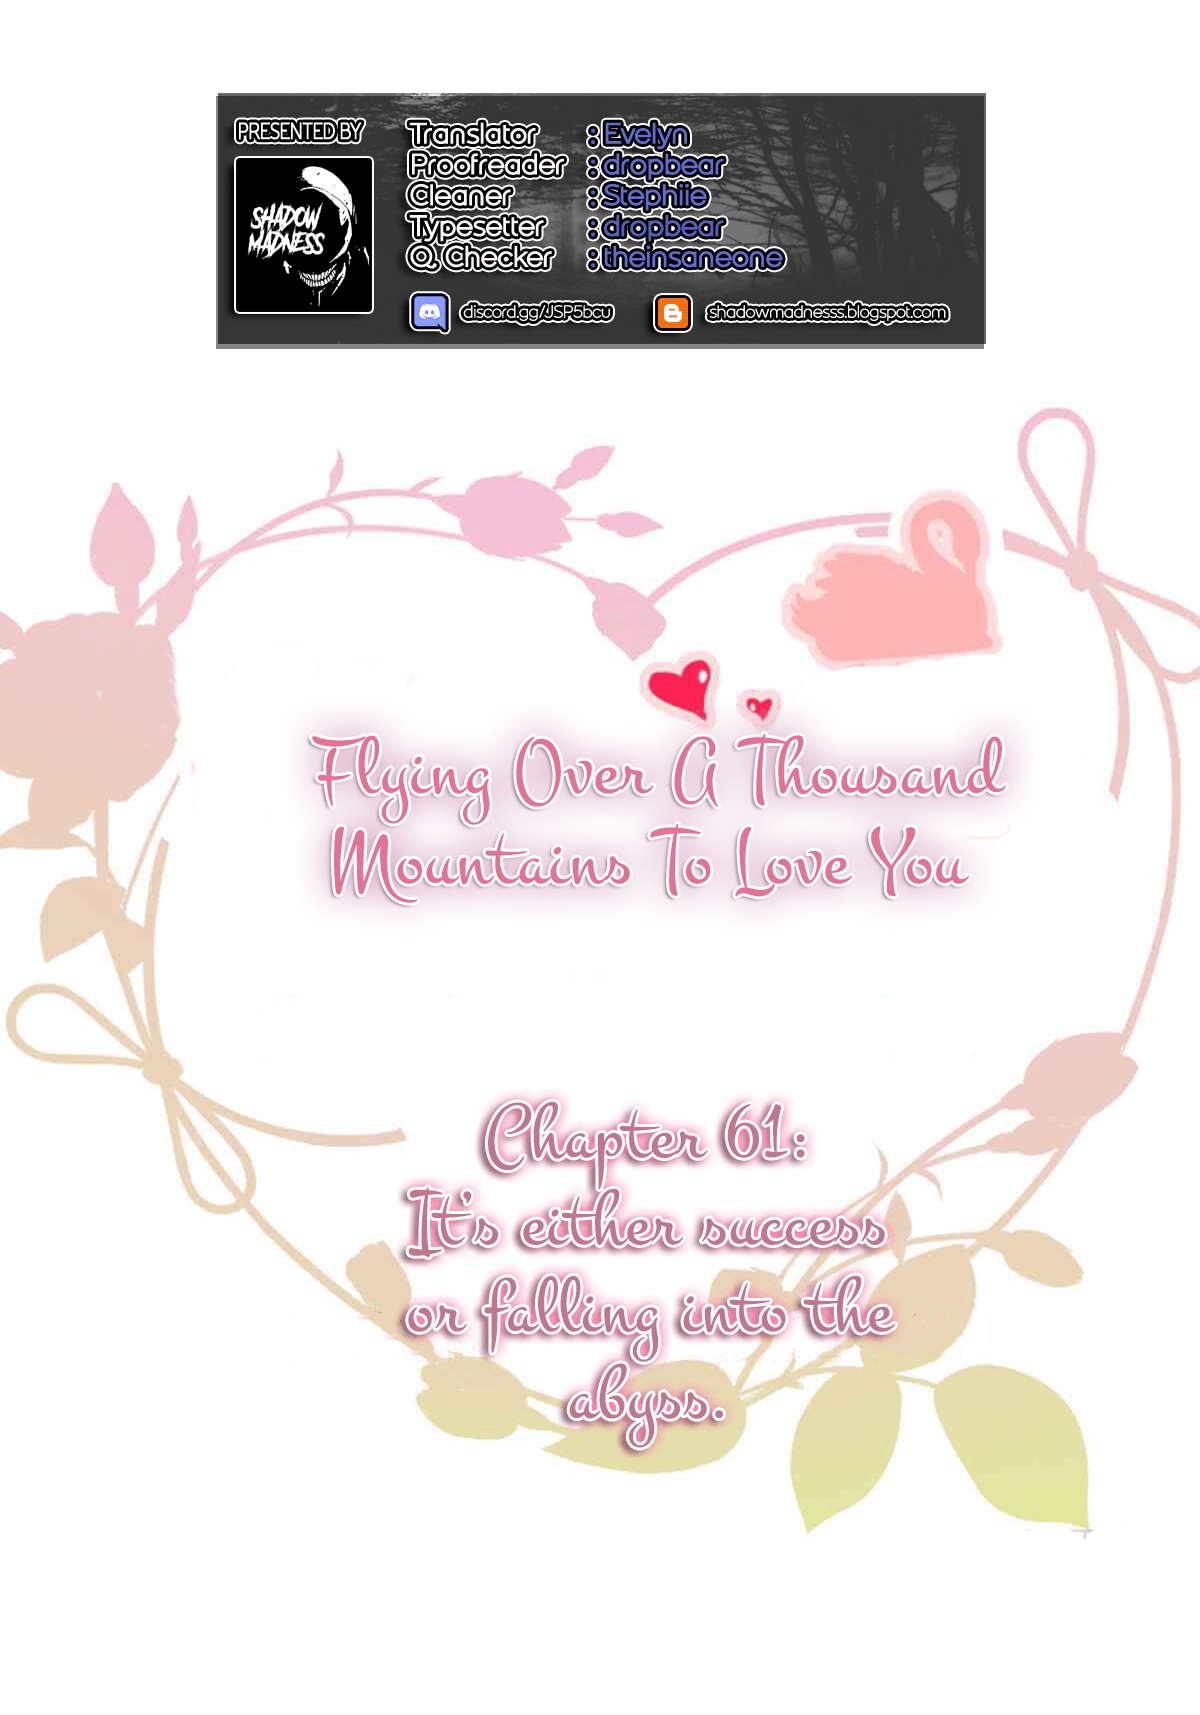 Flying Over a Thousand Mountains to Love You Ch. 61 It's either success or falling into the abyss